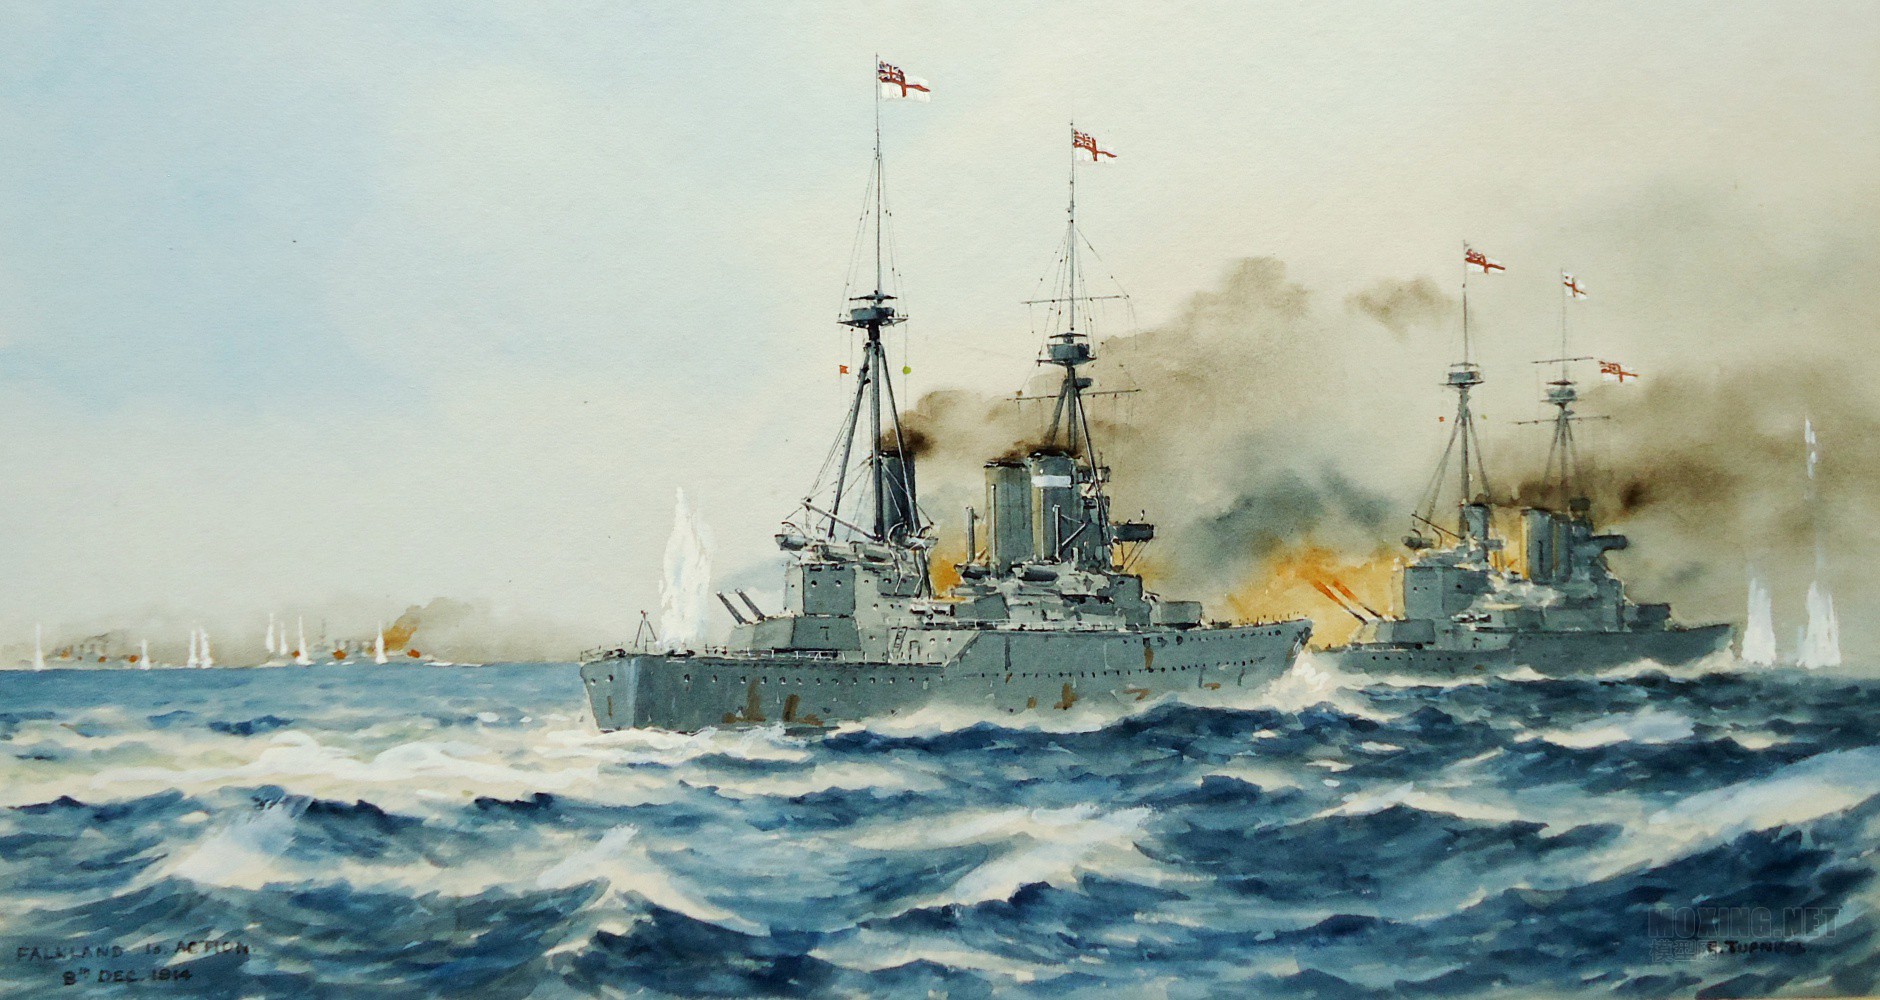 falklands-1914-invincible-and-inflexible-in-action-XL.jpg